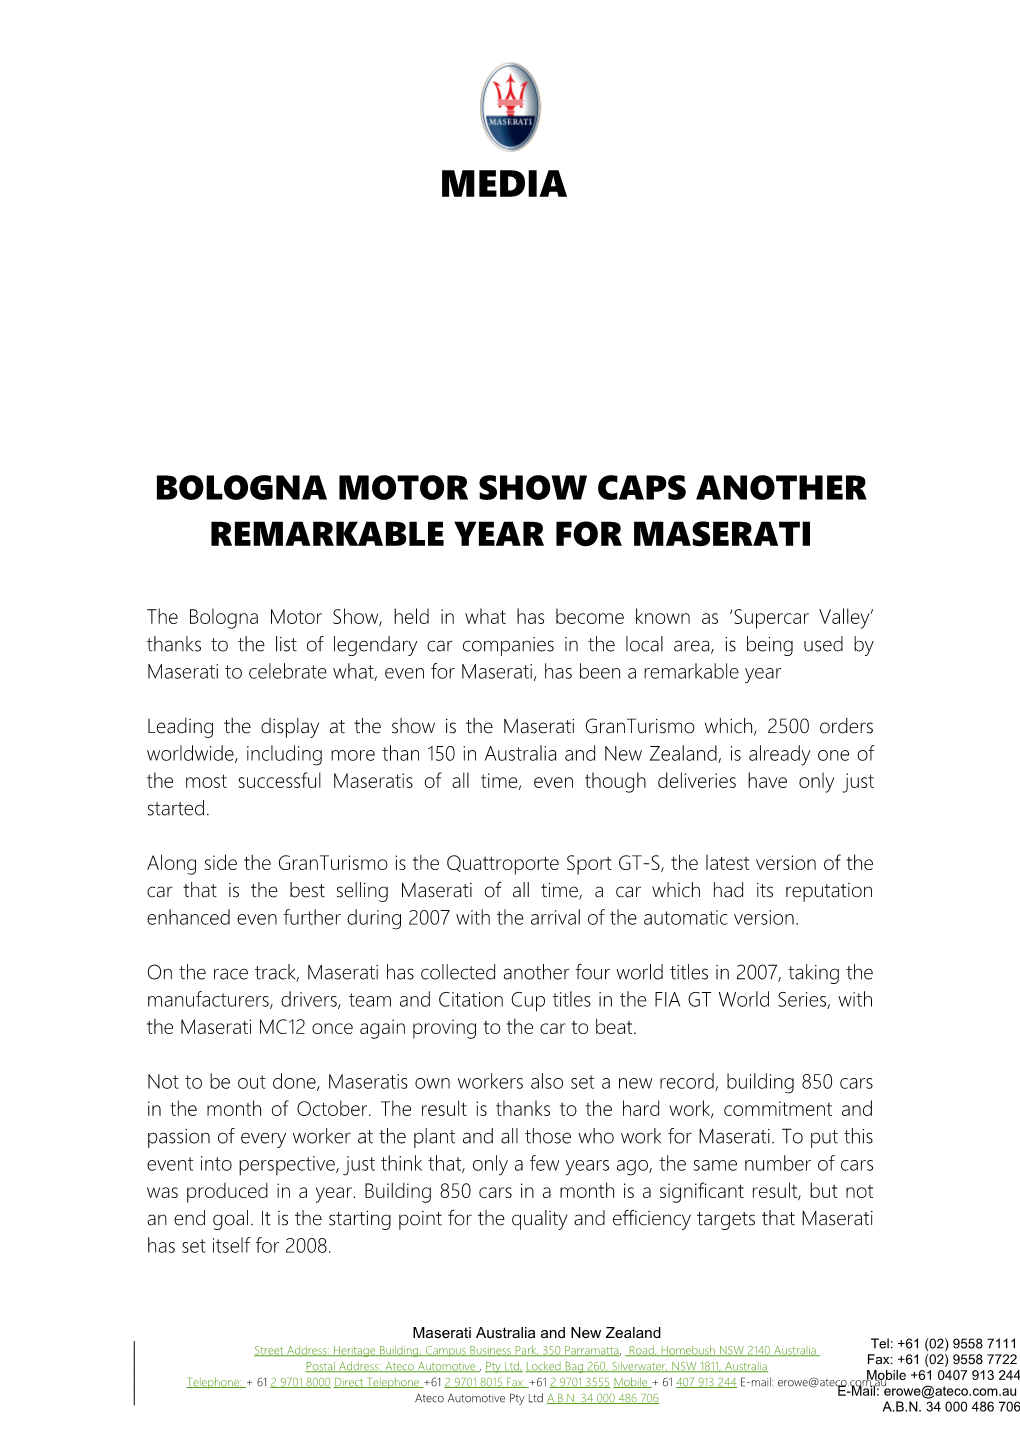 Bologna Motor Show Caps Another Remarkable Year for Maserati